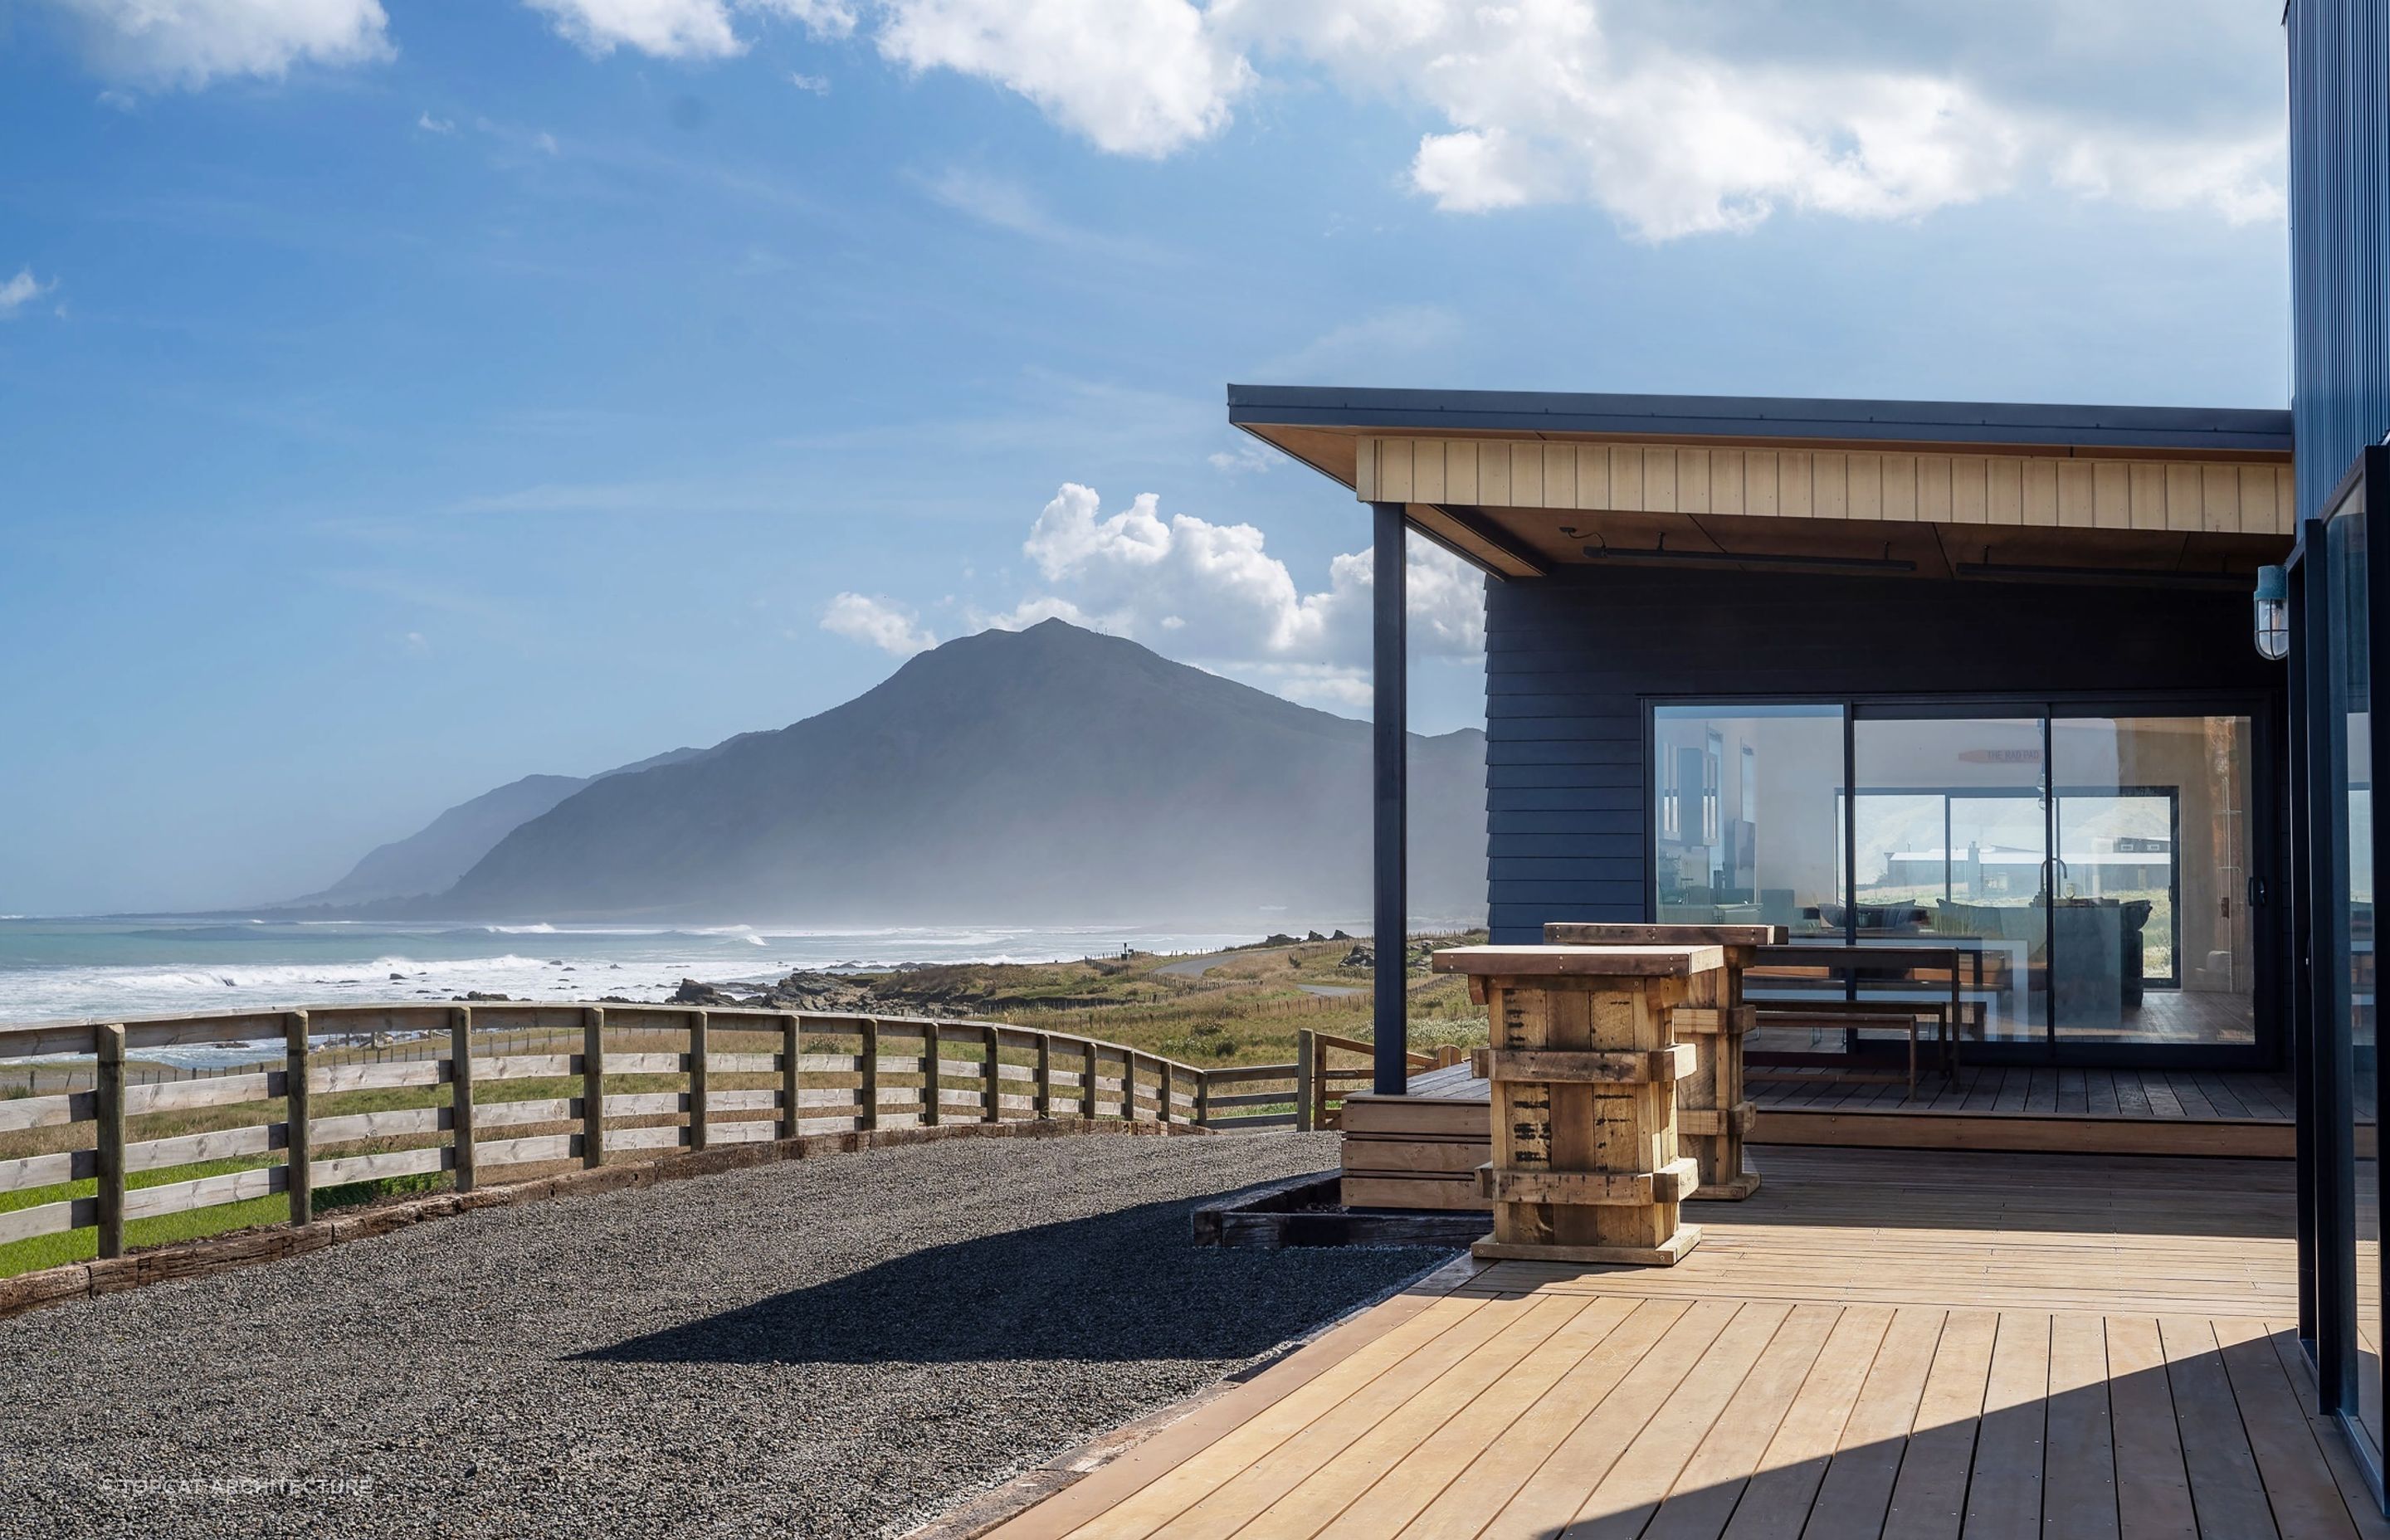 It's hard to imagine a better spot for a holiday home than the one the Rad Pad enjoys.